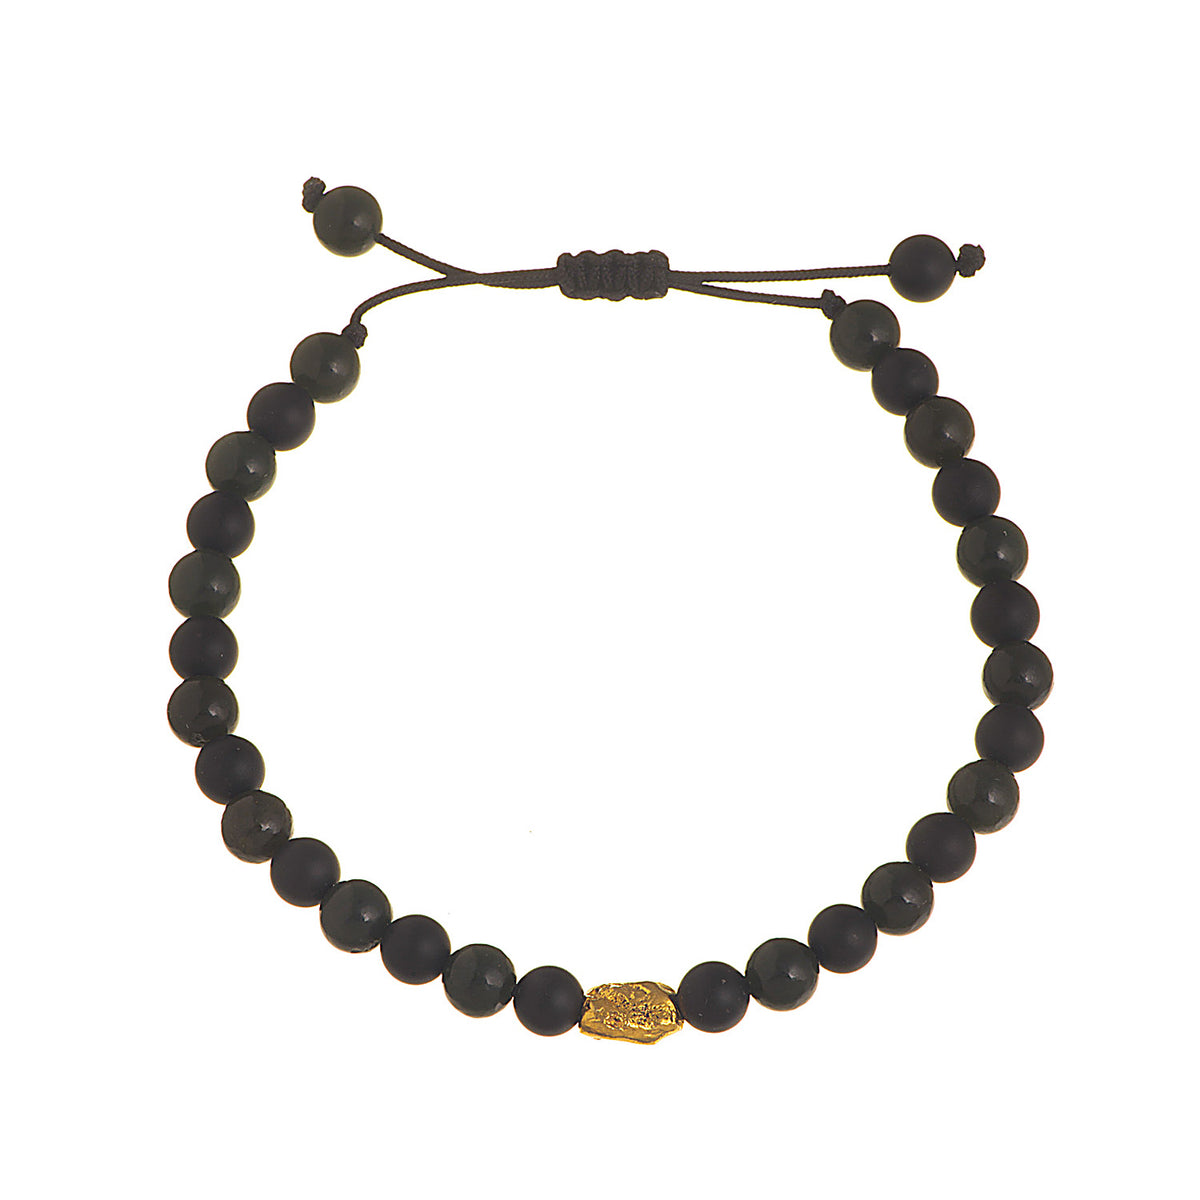 Gold bead bracelet combined with green jade and onyx beads. Perfect for a present to your boyfriend.